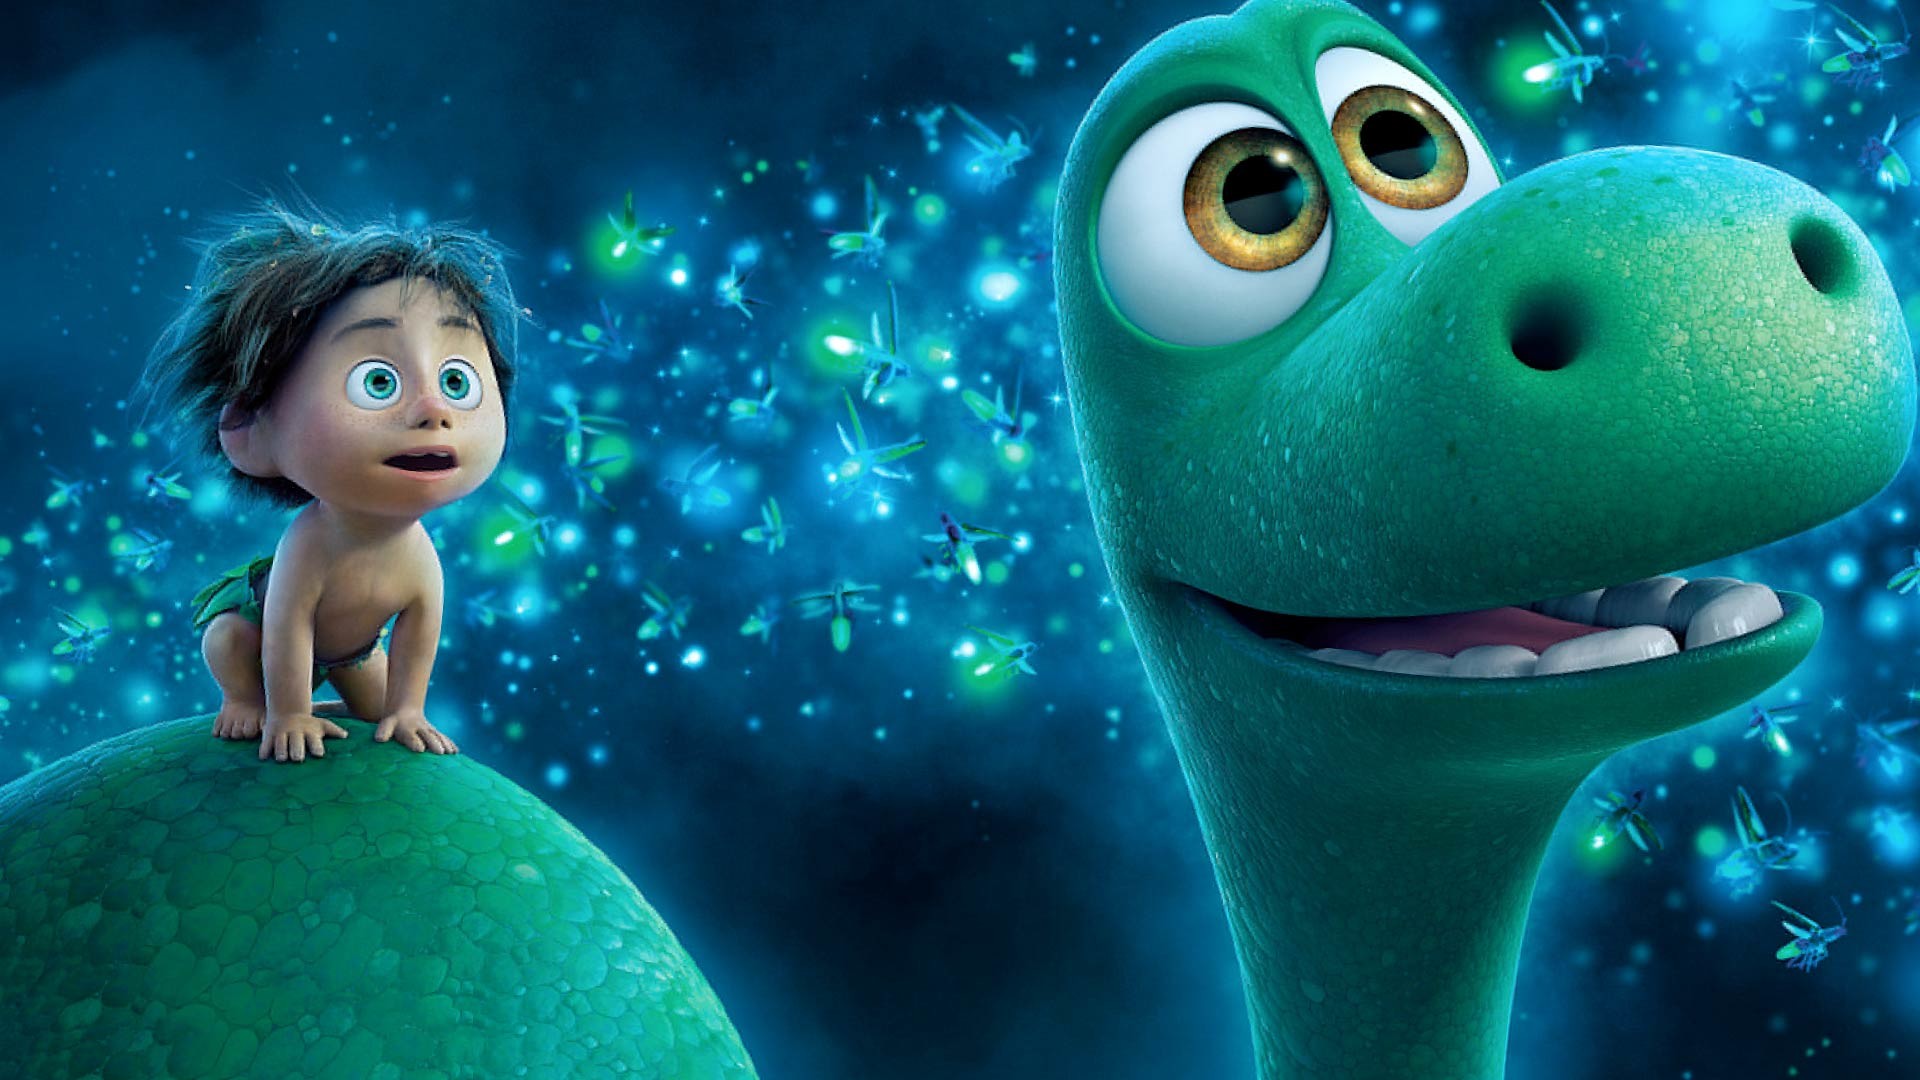 1920x1080 The Good Dinosaur 2015 Movie Wallpapers - THIS Wallpaper